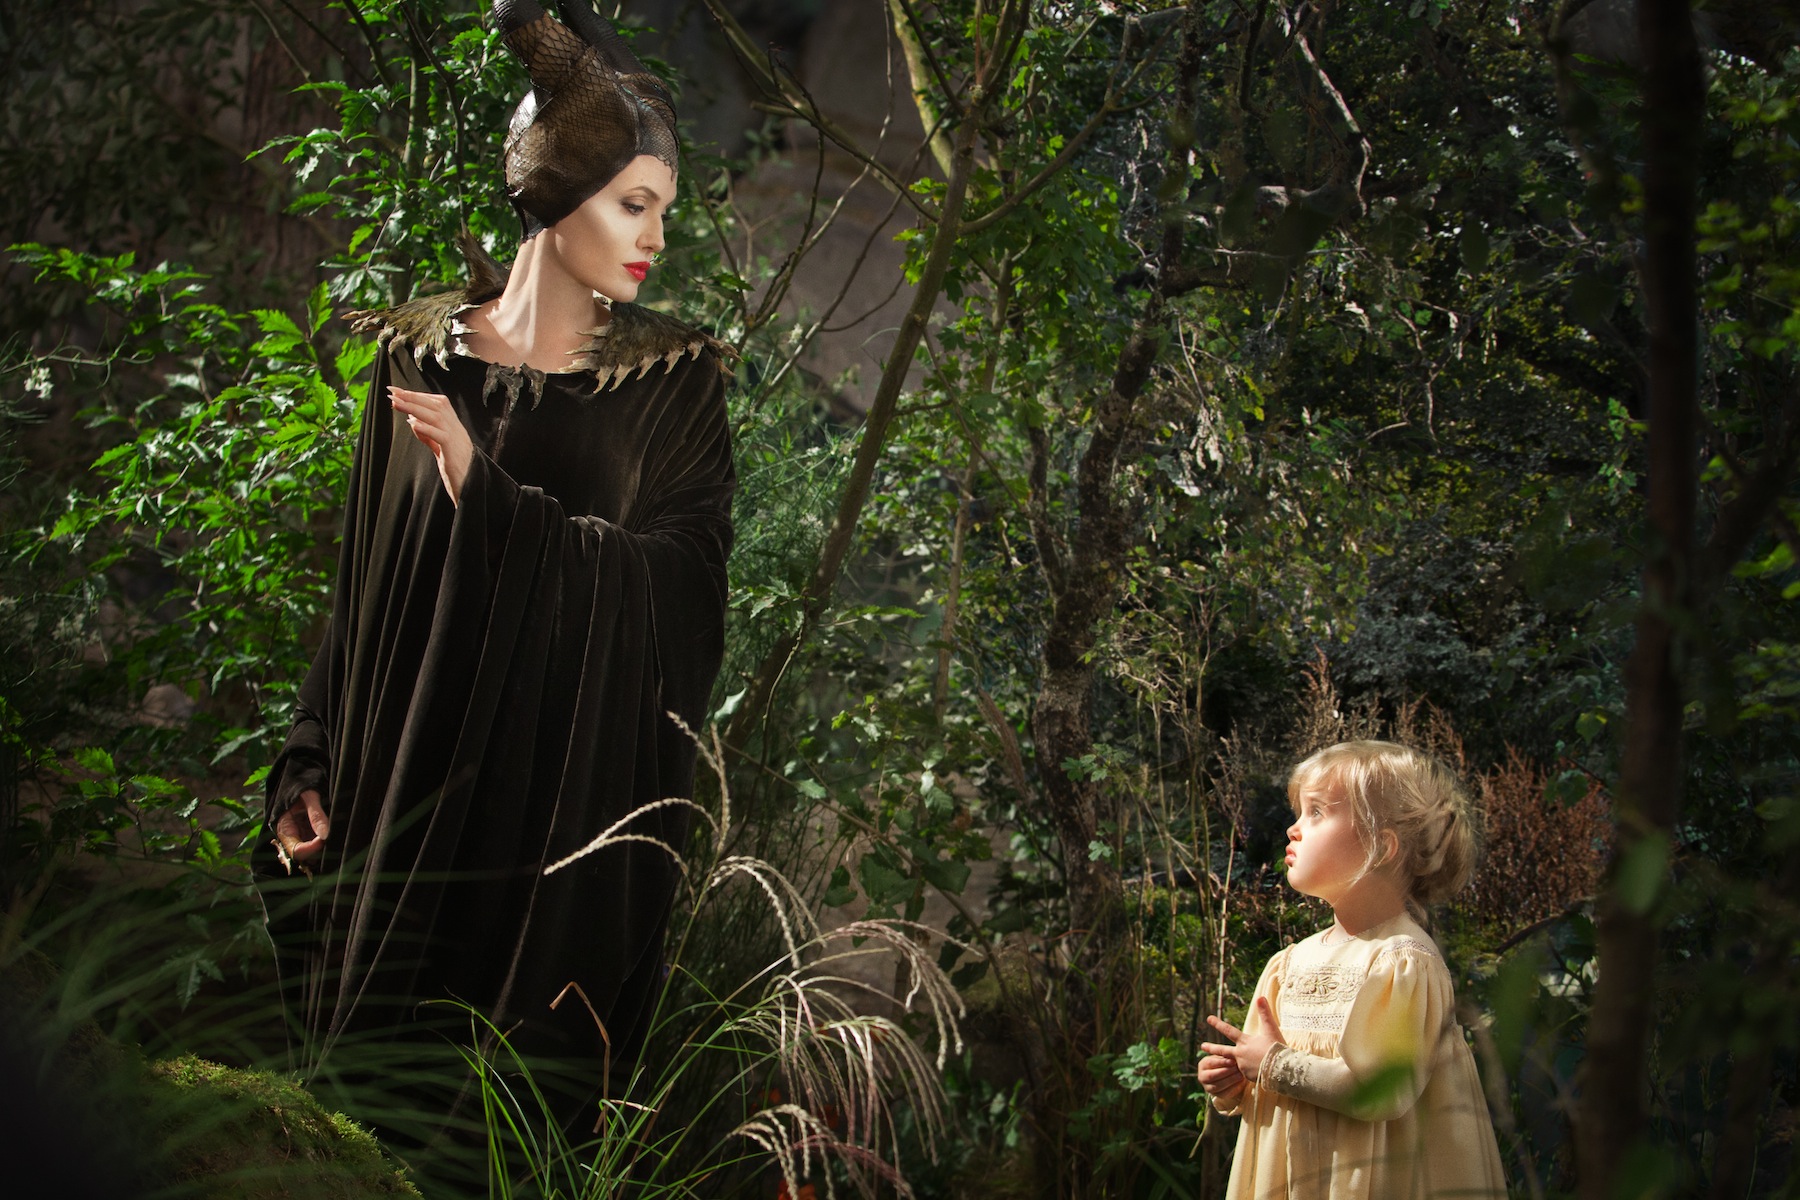 Angelina Jolie as Maleficent, left, in a scene with her daughter Vivienne Jolie-Pitt, portraying Young Aurora, in a scene from  "Maleficent." (Frank Connor / Disney / AP Photo)